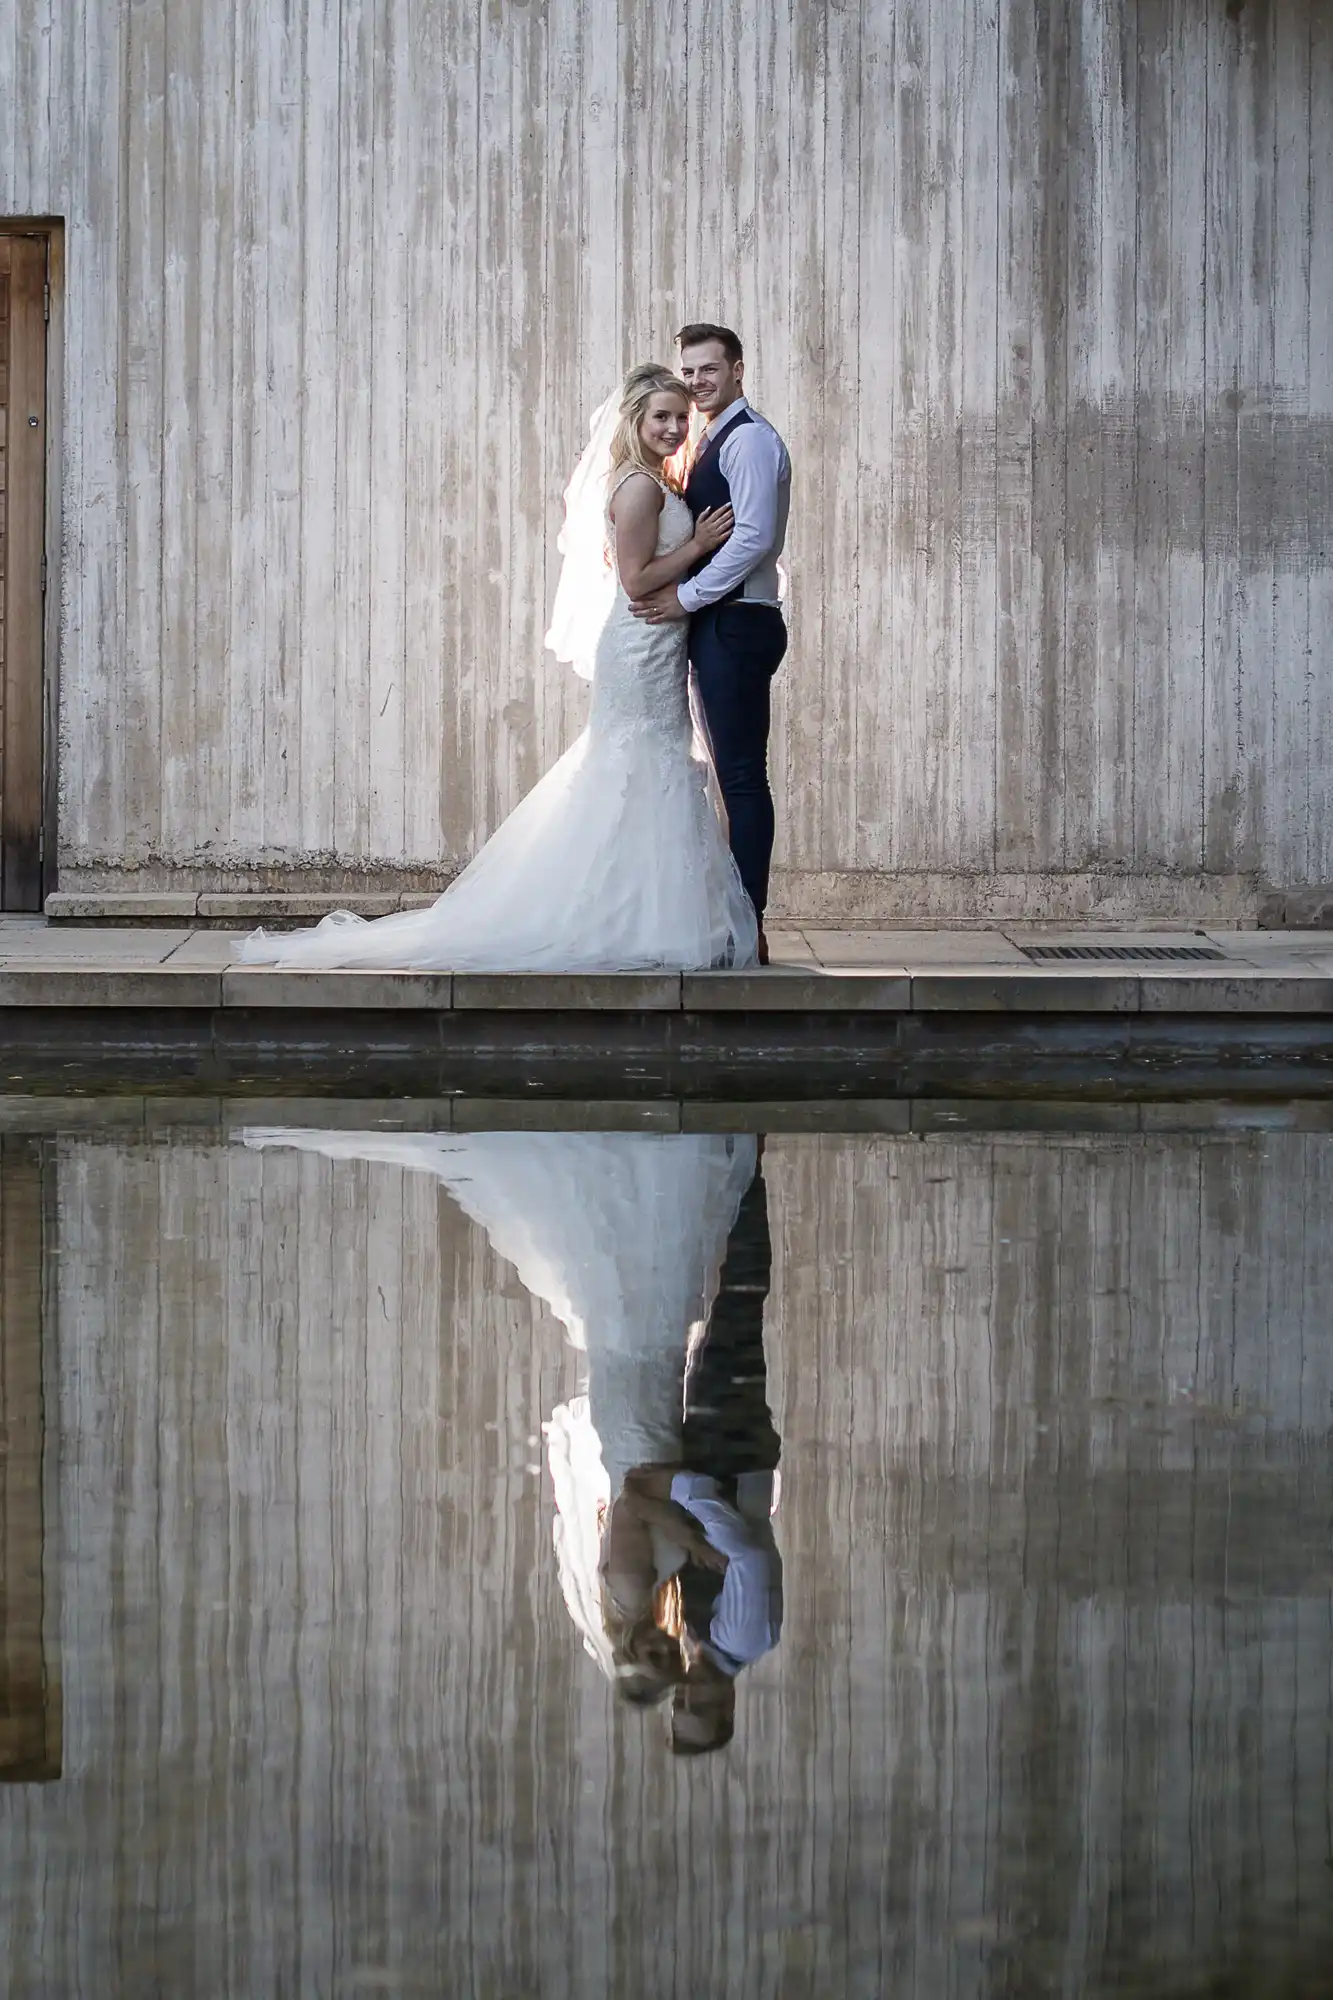 A bride and groom stand by a concrete wall, reflected in a still body of water. The bride wears a white gown; the groom is in a light shirt and dark pants.